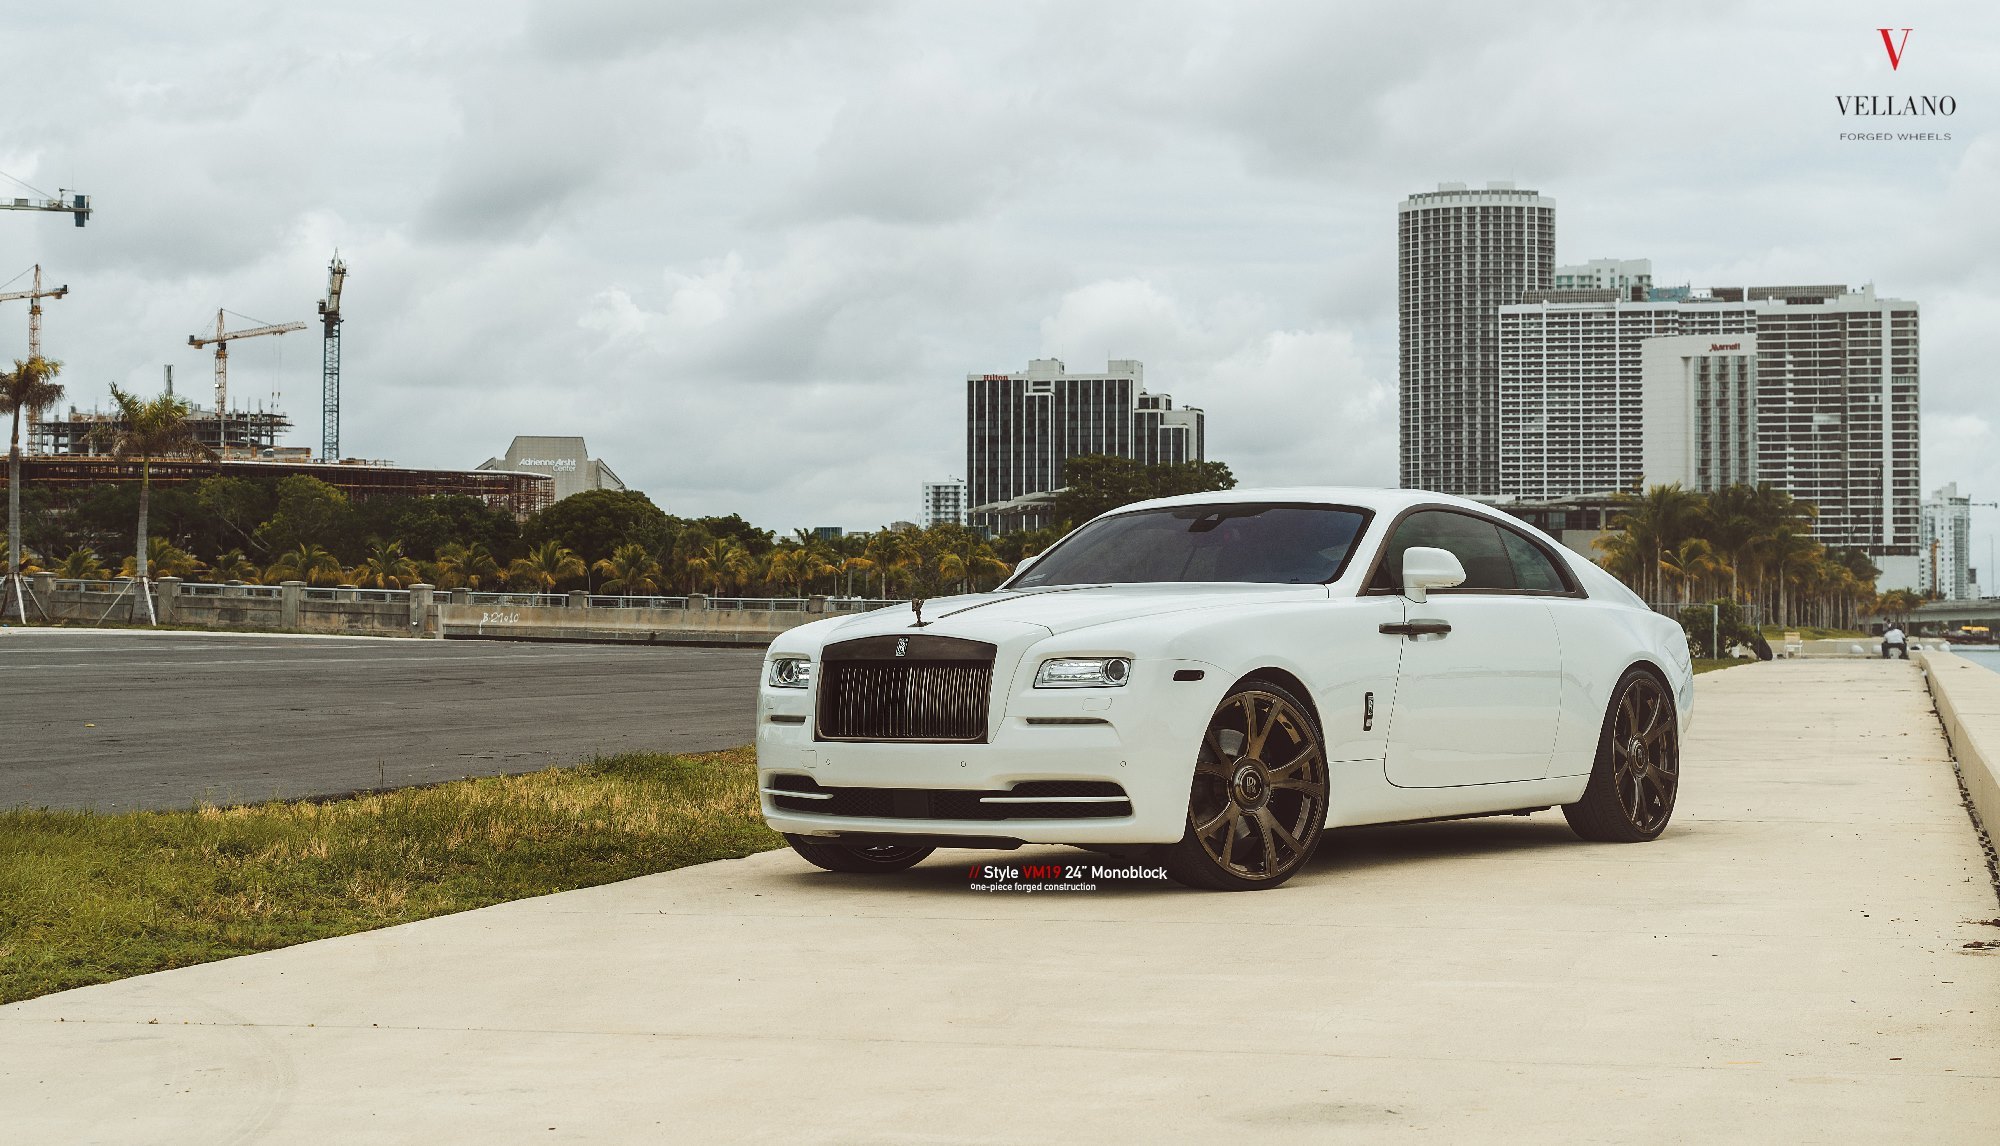 Custom Blacked Out Grille on White Rolls Royce Wraith - Photo by Vellano